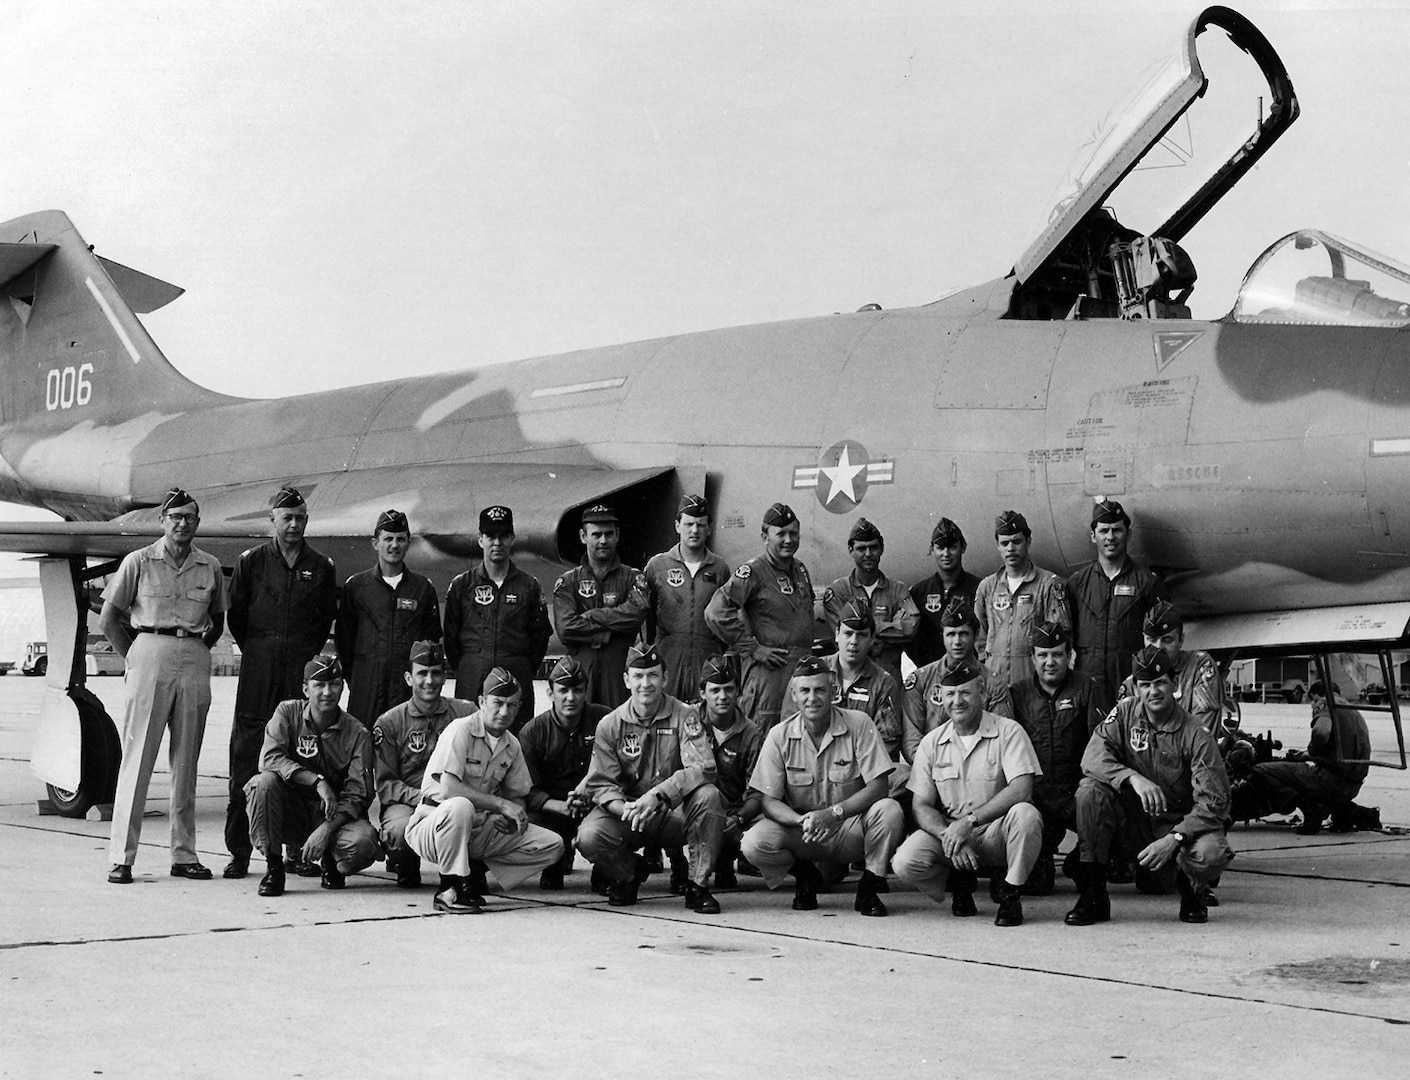 Kentucky Air National Guard aircrews with the 123rd Tactical Reconnaissance Squadron were called to active duty in January, 1968 in response to the capture of the US Naval Ship Pueblo by North Korea. 104 officers and 650 Airmen mobilized overseas for the incident would be called the Pueblo Crisis.